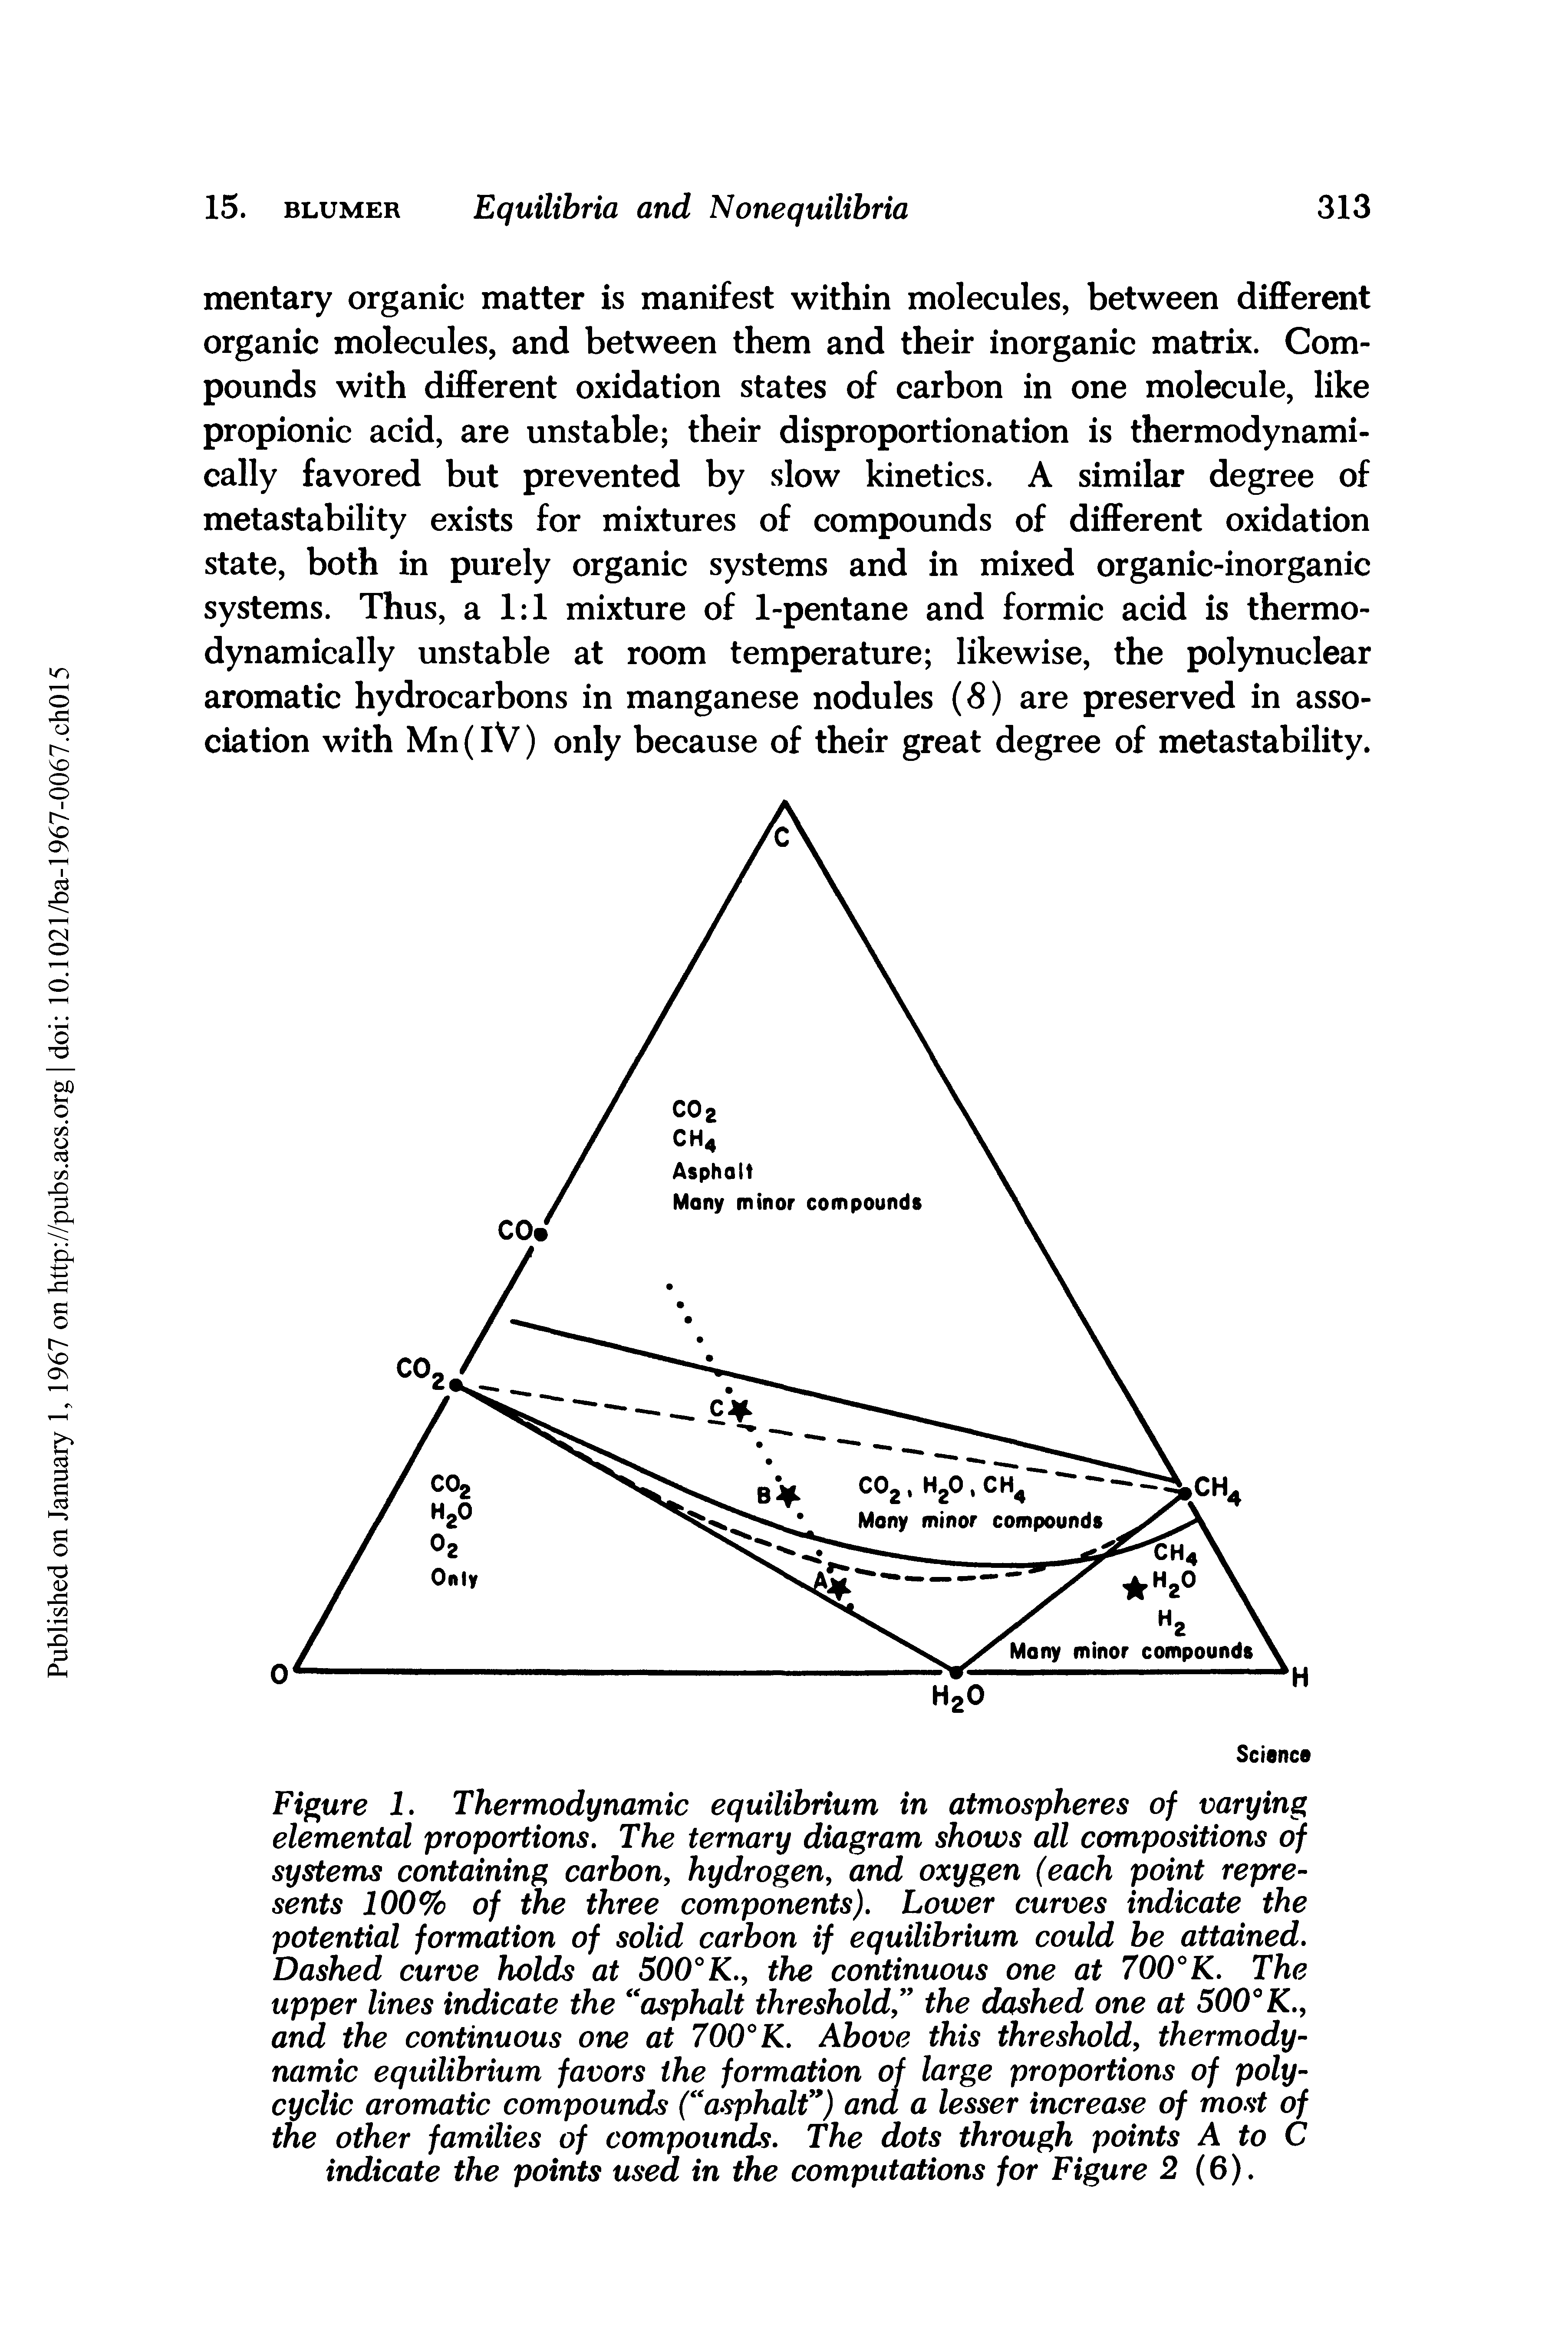 Figure 1. Thermodynamic equilibrium in atmospheres of varying elemental proportions. The ternary diagram shows all compositions of systems containing carbon, hydrogen, and oxygen (each point represents 100% of the three components). Lower curves indicate the potential formation of solid carbon if equilibrium could be attained. Dashed curve holds at 500°K., the continuous one at 700°K. The upper lines indicate the asphalt threshold, the dashed one at 500° K., and the continuous one at 700° K. Above this threshold, thermodynamic equilibrium favors the formation of large proportions of polycyclic aromatic compounds ( asphalt ) ana a lesser increase of most of the other families of compounds. The dots through points A to C indicate the points used in the computations for Figure 2 (6).